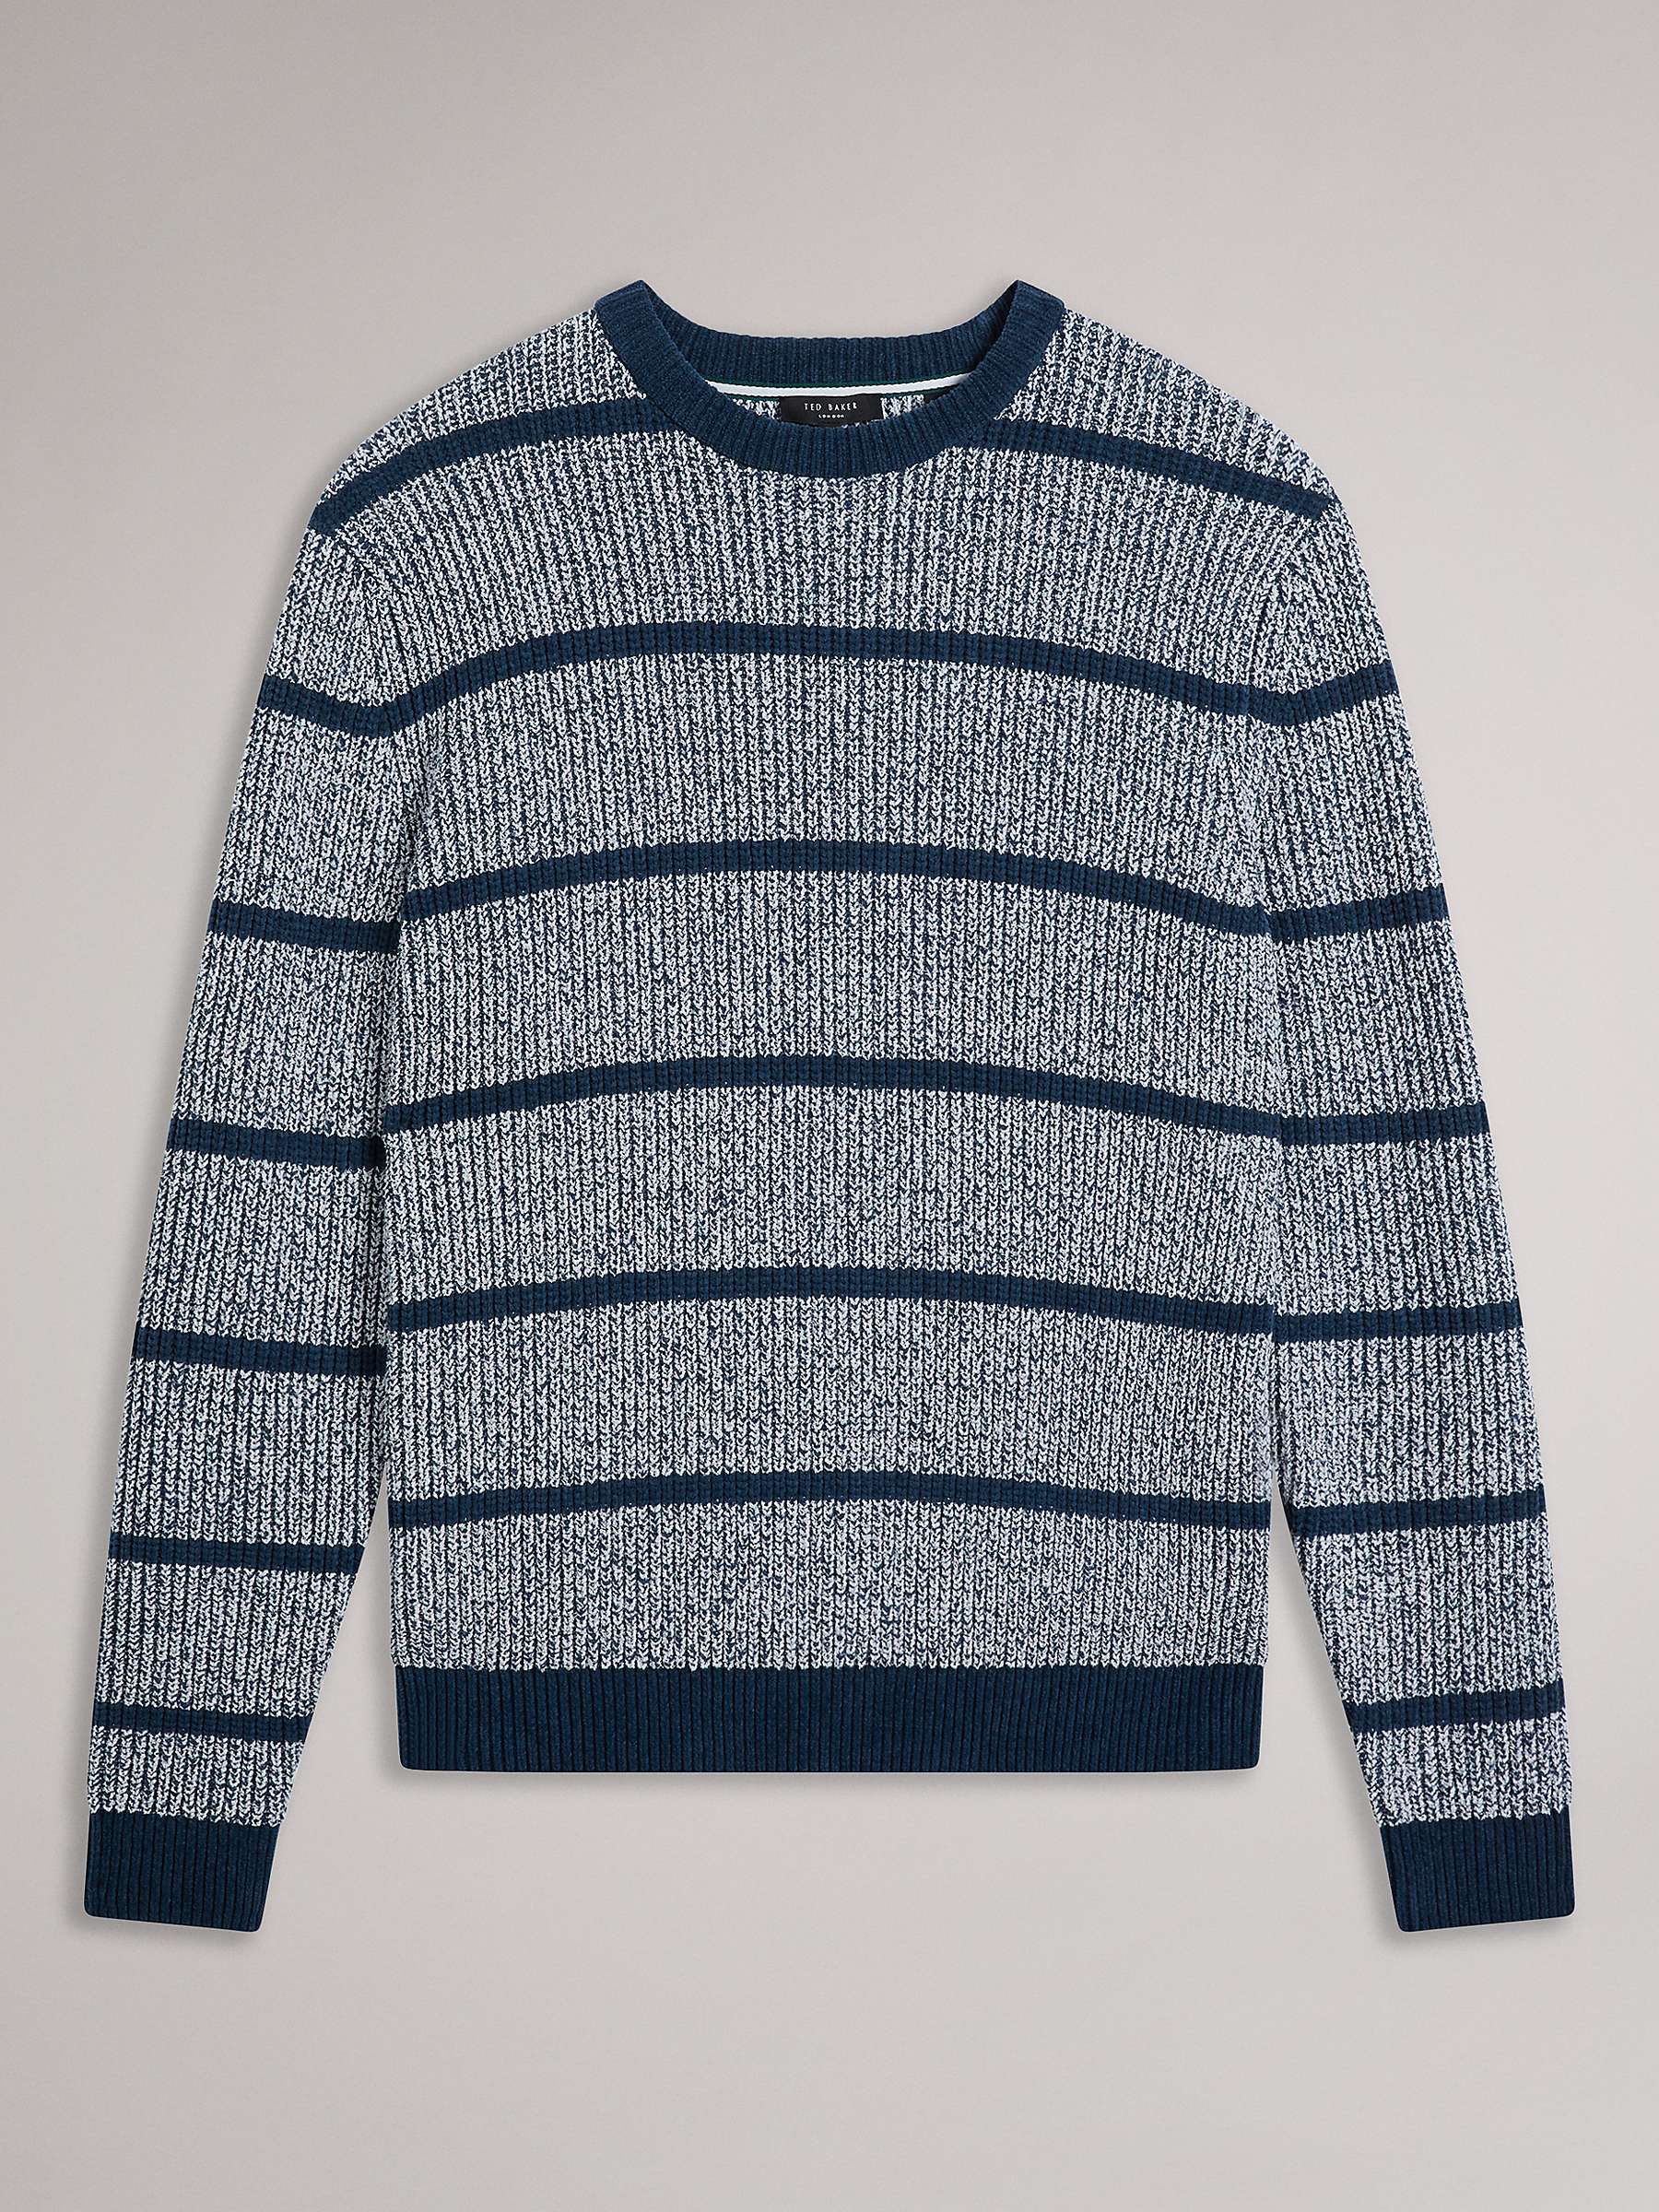 Ted Baker Angio Stripe Jumper, Navy at John Lewis & Partners